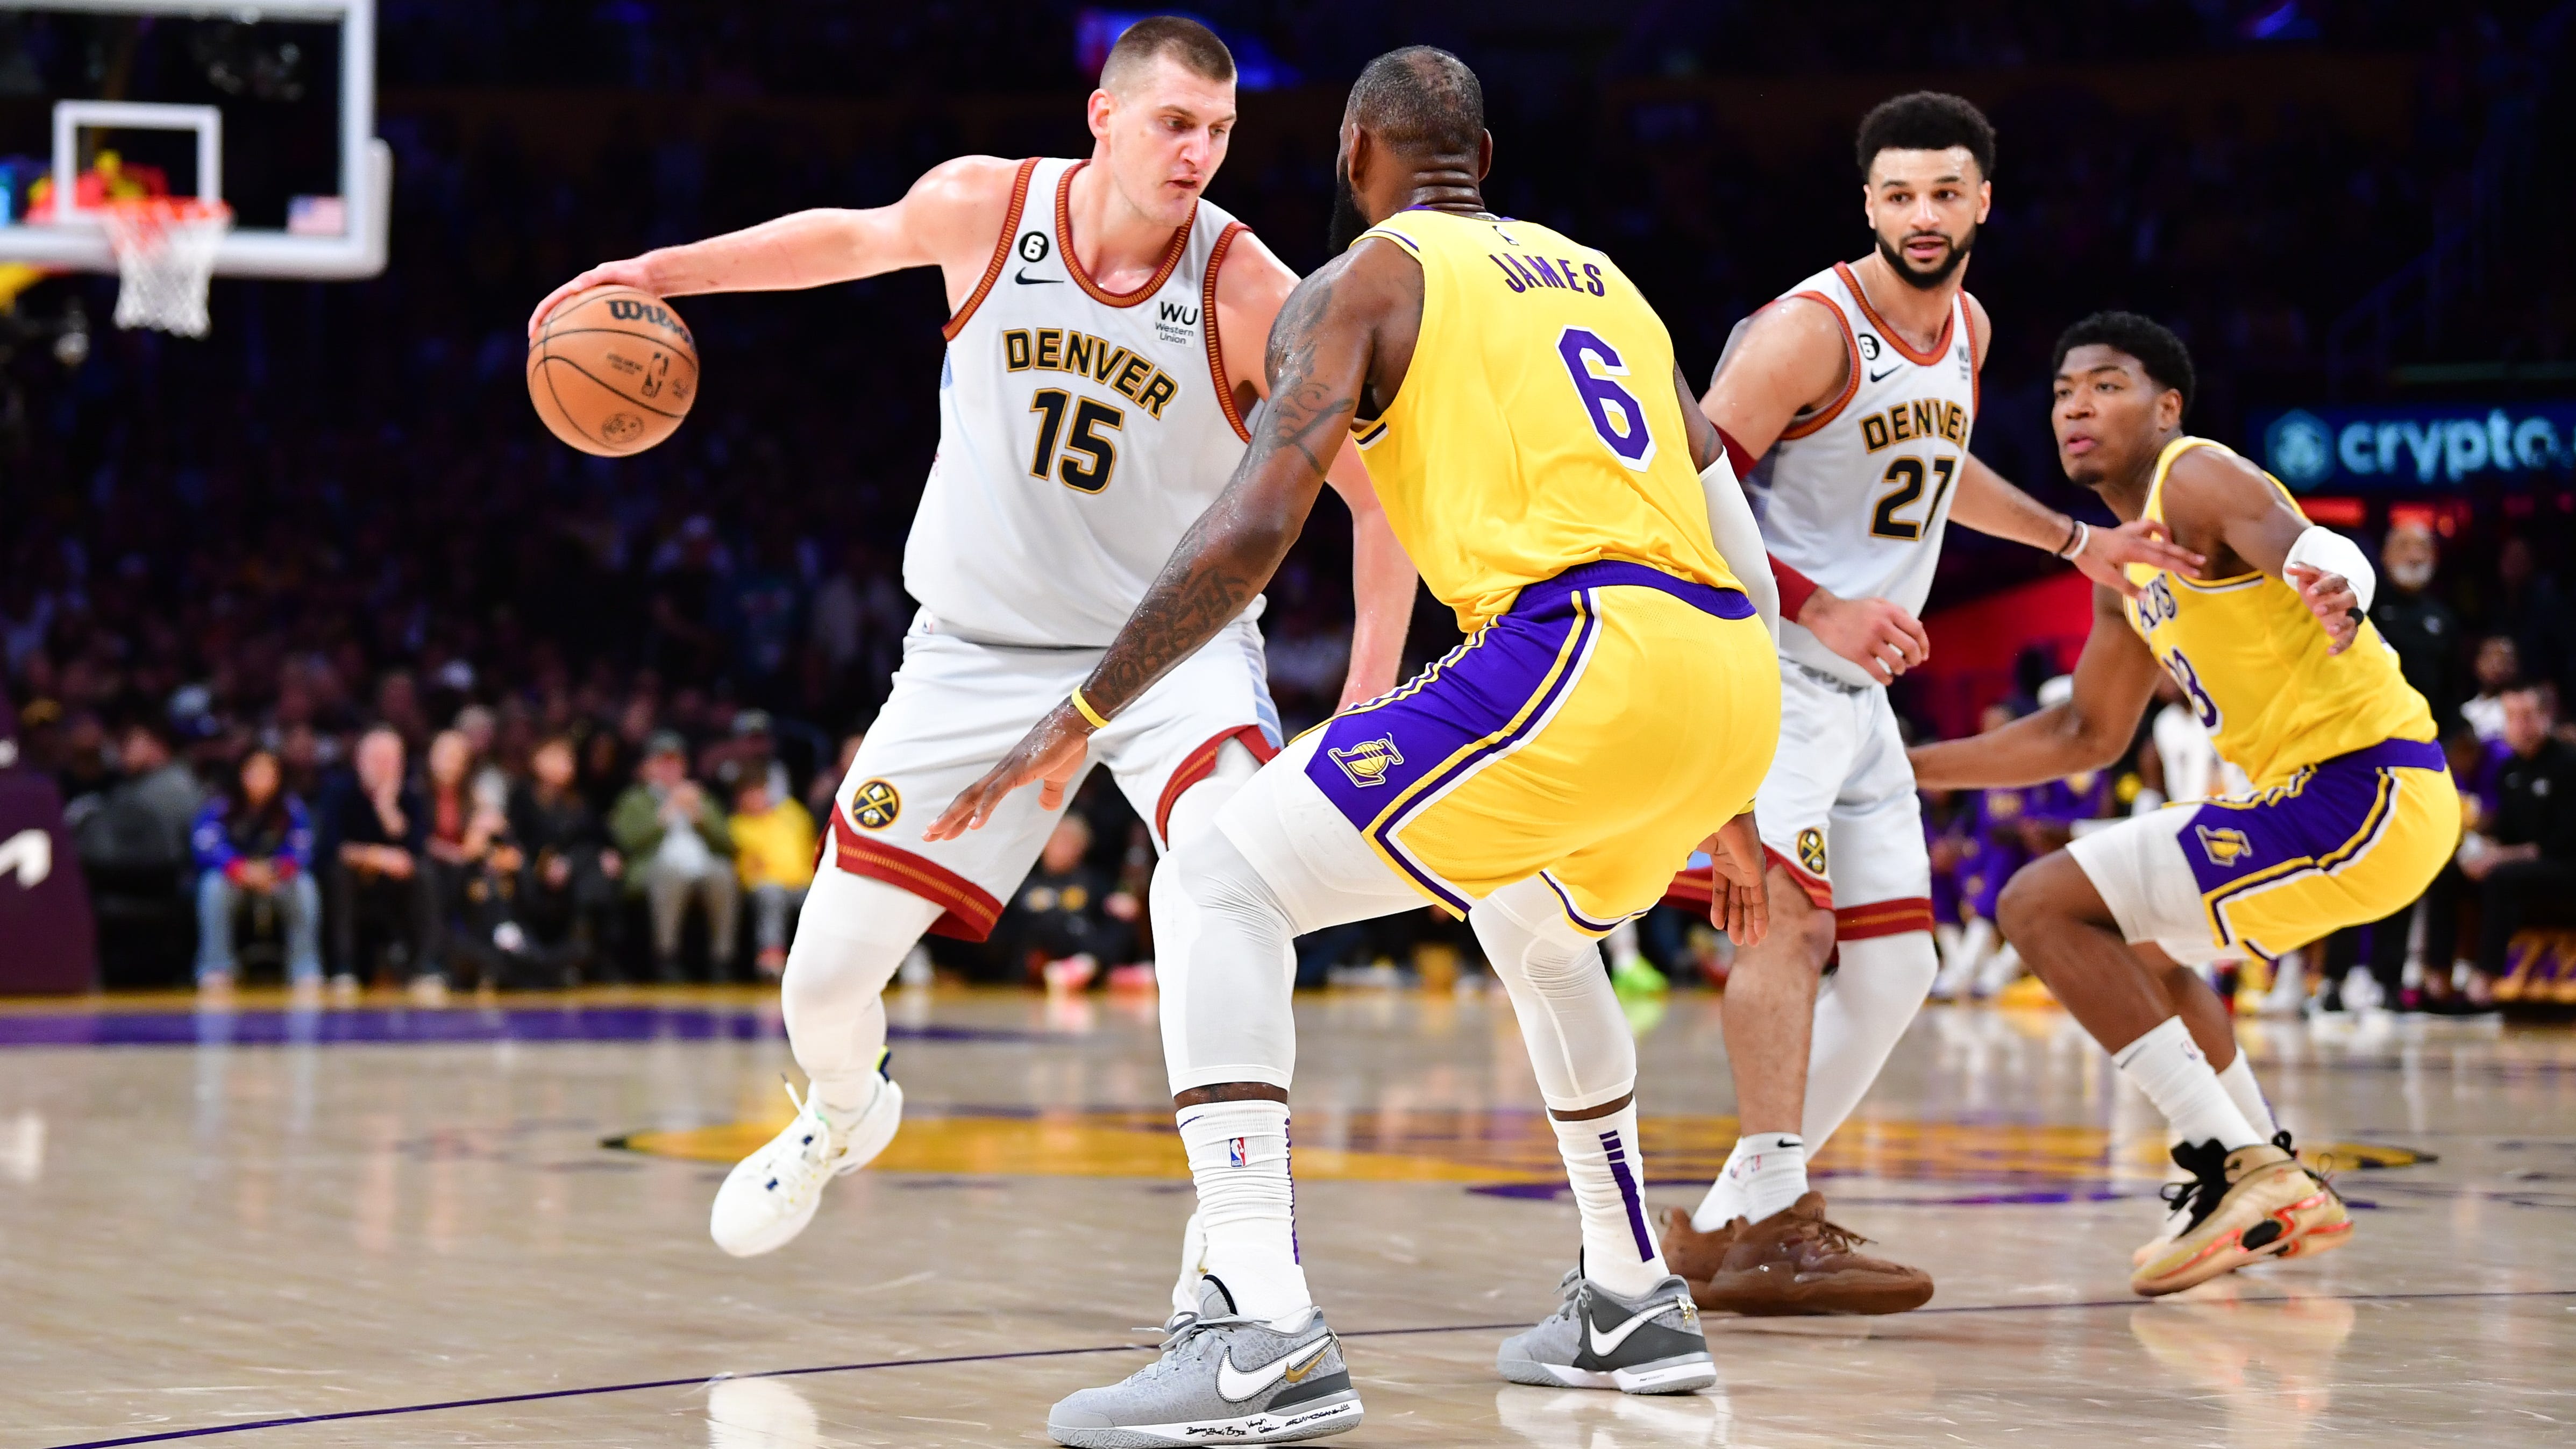 Nuggets center Nikola Jokic drives to the basket against Lakers forward LeBron James in Game 4 of the Western Conference finals.